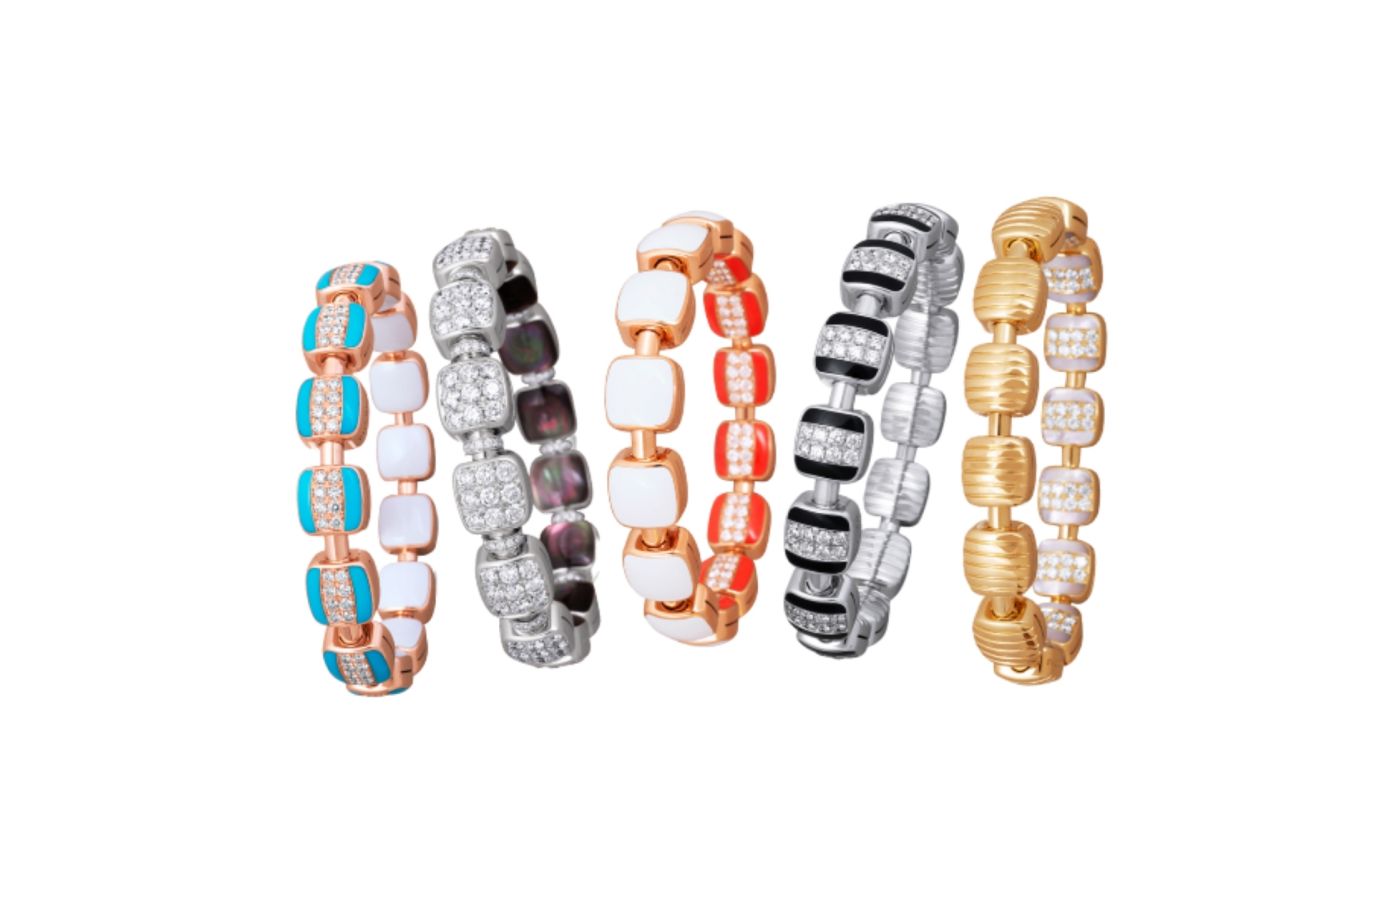 PICCHIOTTI REVERSIBLE XPANDABLE™ bracelets in gold, turquoise, white ceramic, onyx, grey mother-of-pearl and diamond